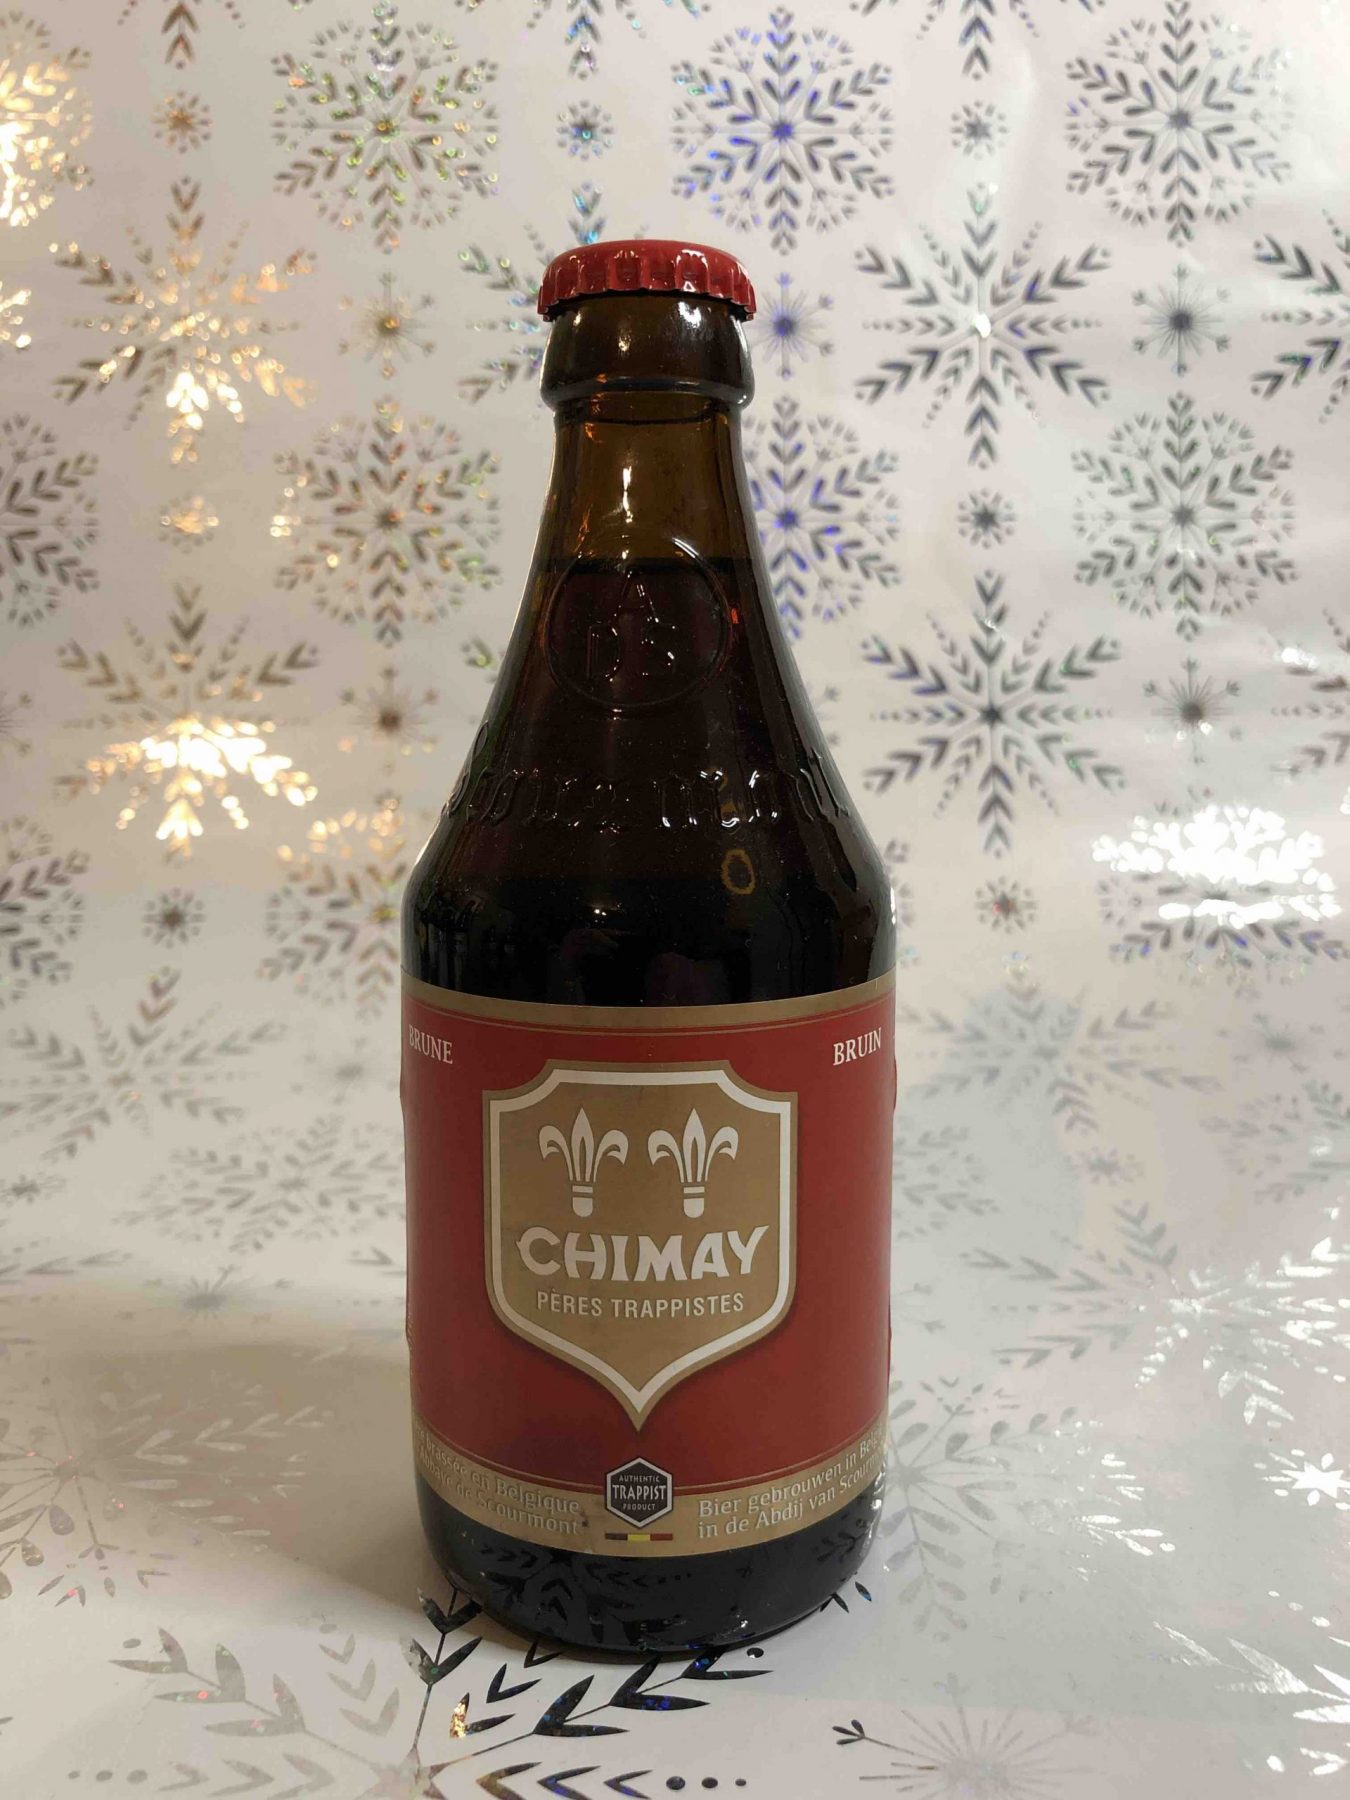 Chimay Trappist